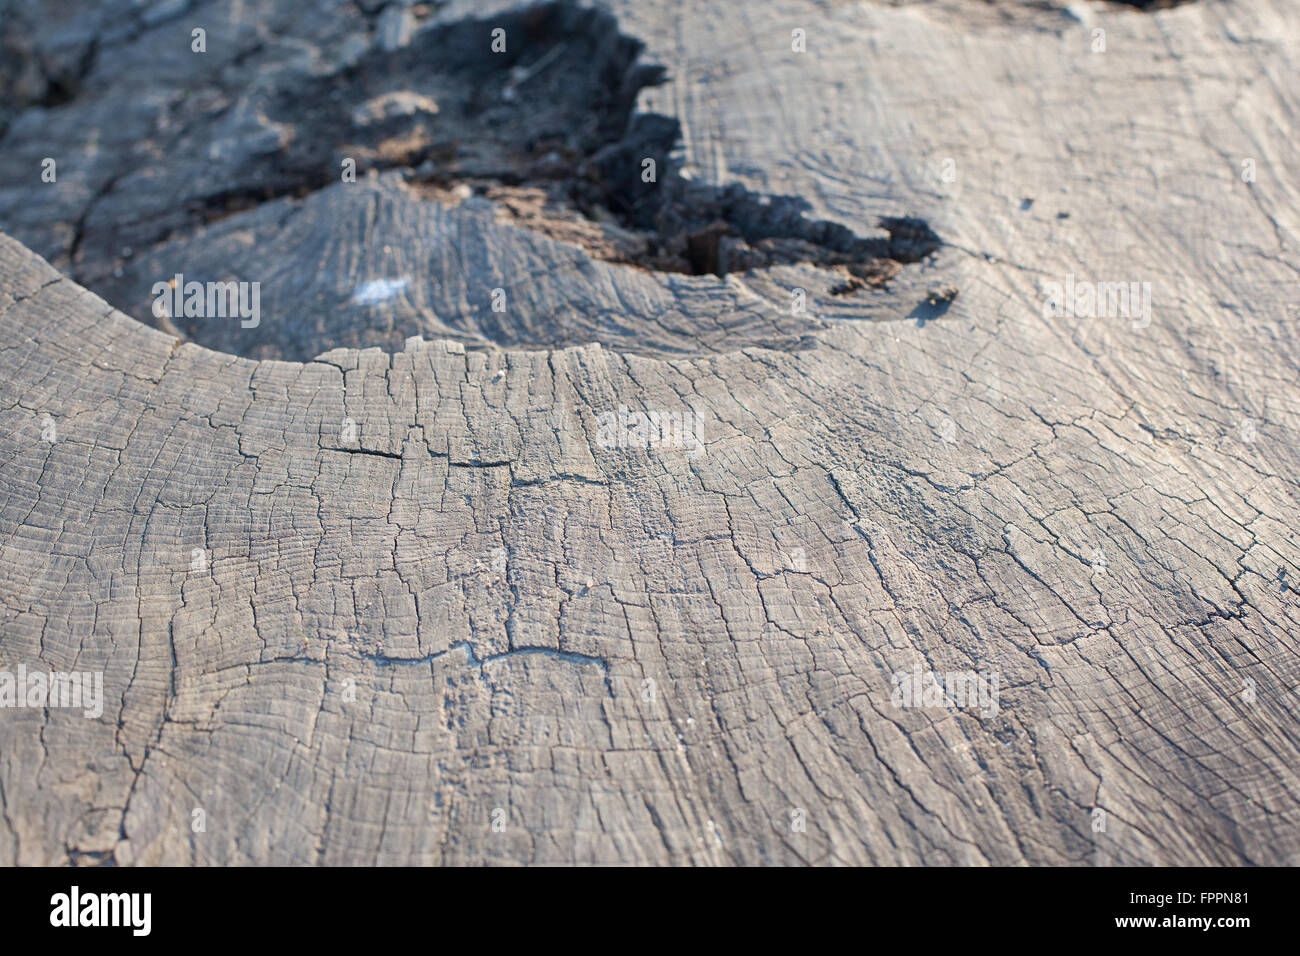 Abstract detail of a tree stump Stock Photo